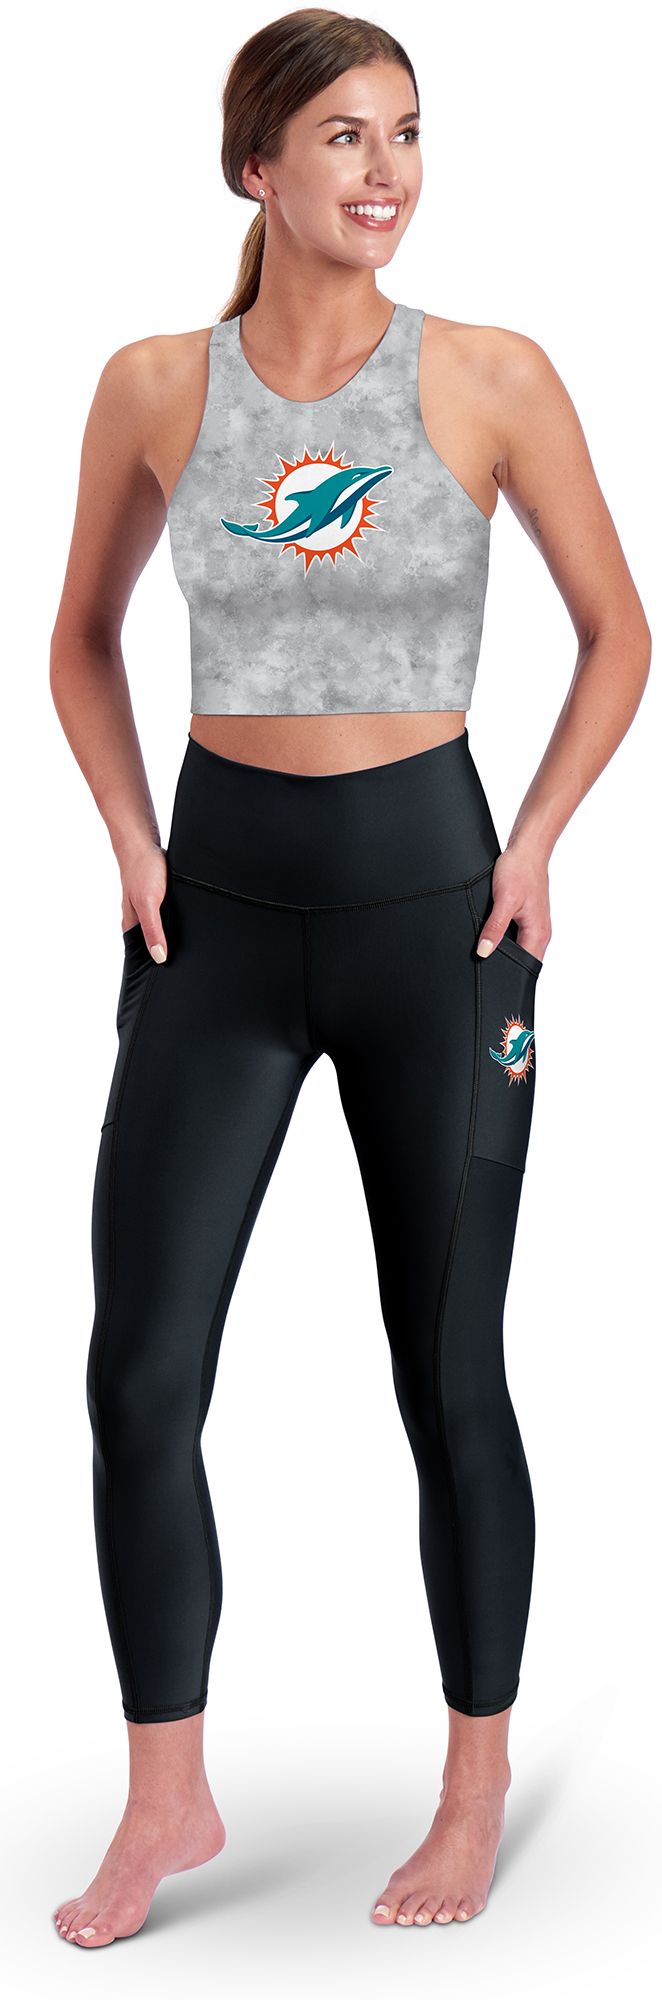 Dick's Sporting Goods Certo Women's Miami Dolphins Assembly Black